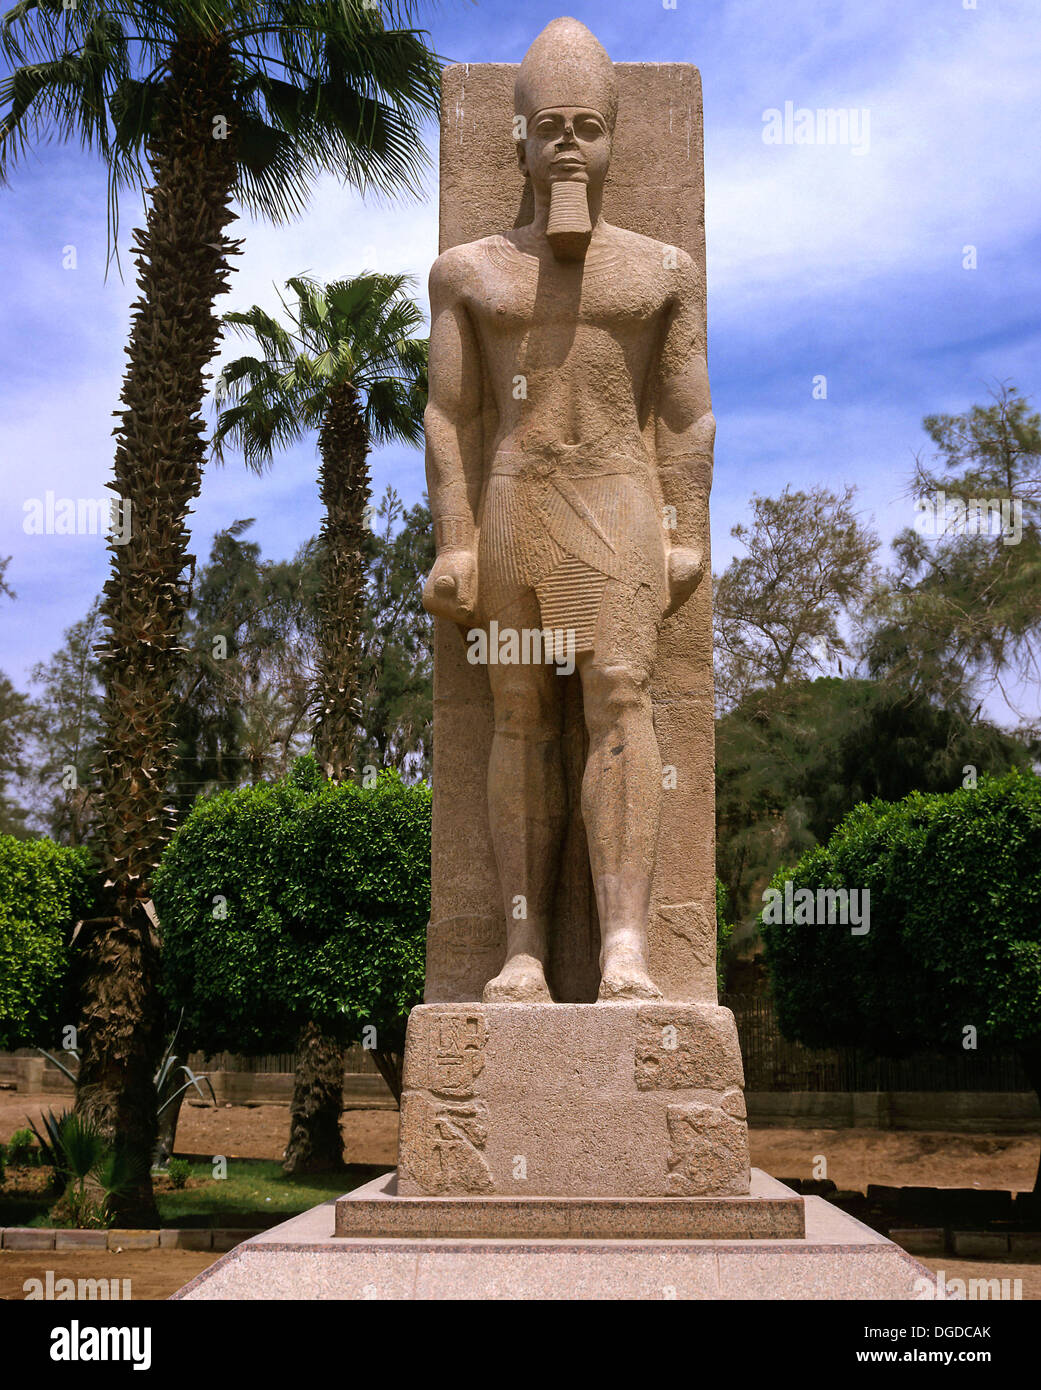 Colossal statue of Ramses II -13th century BC, Ruins of Memphis, Egypt, Africa Stock Photo